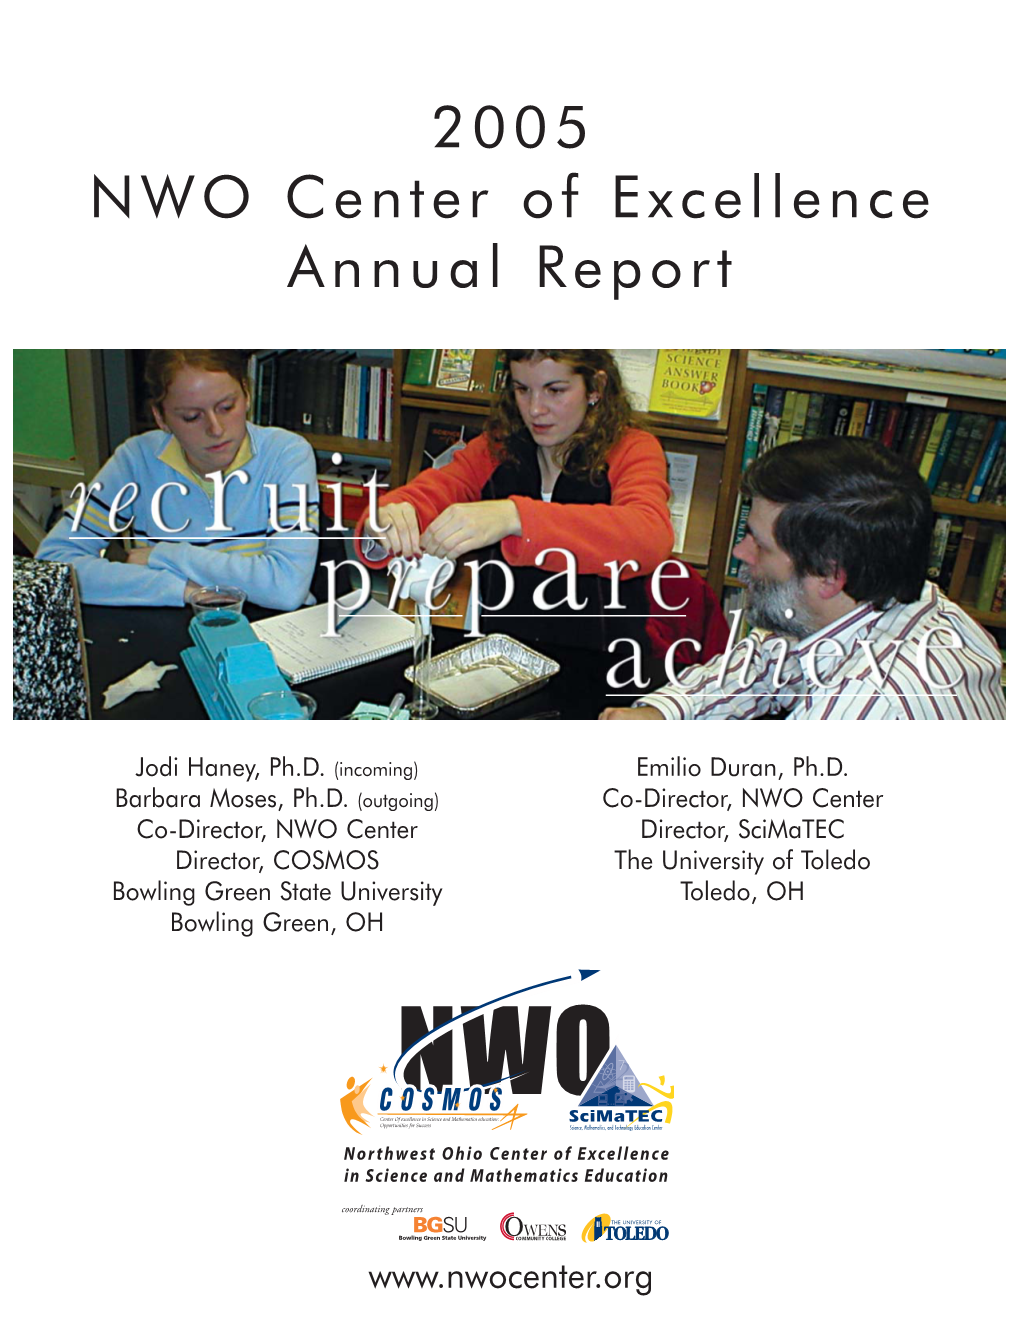 NWO Center of Excellence Annual Report